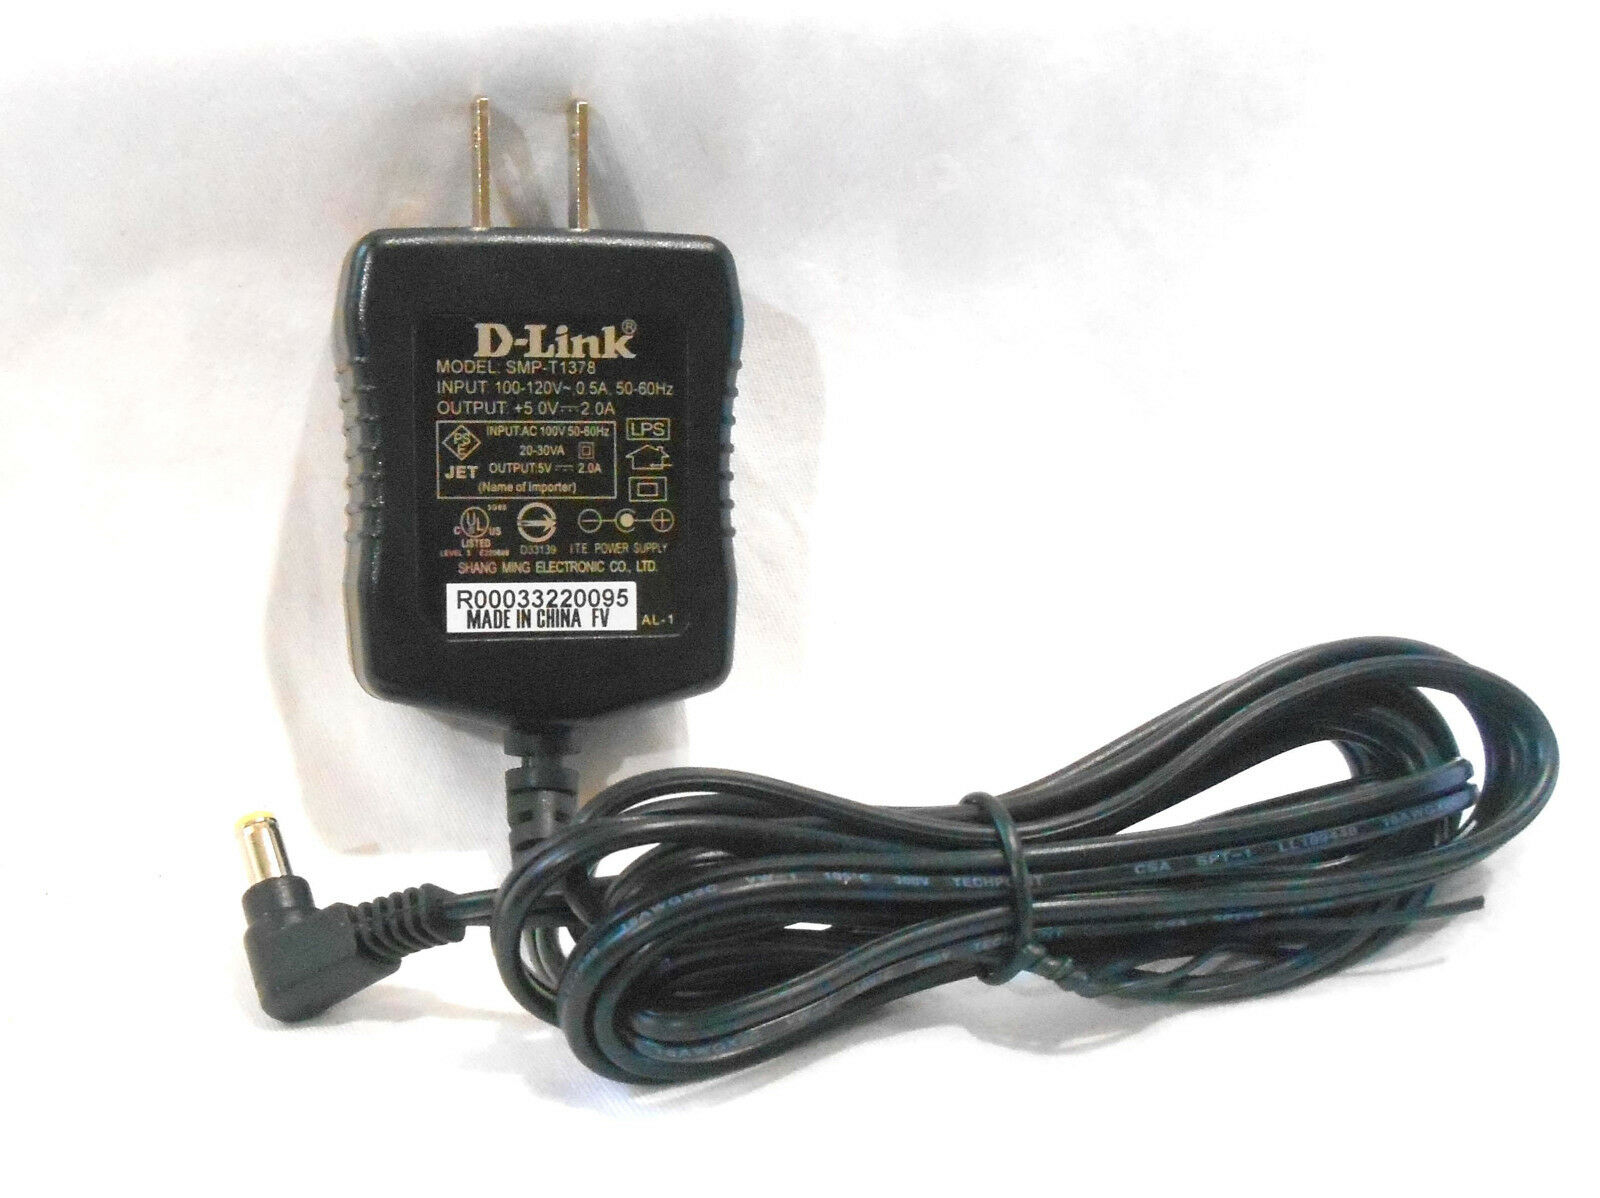 New 5V 2A D-link DI-524 AD-12S05 DI-624 Wireless Router SMP-T1378 Power Supply AC ADAPTER